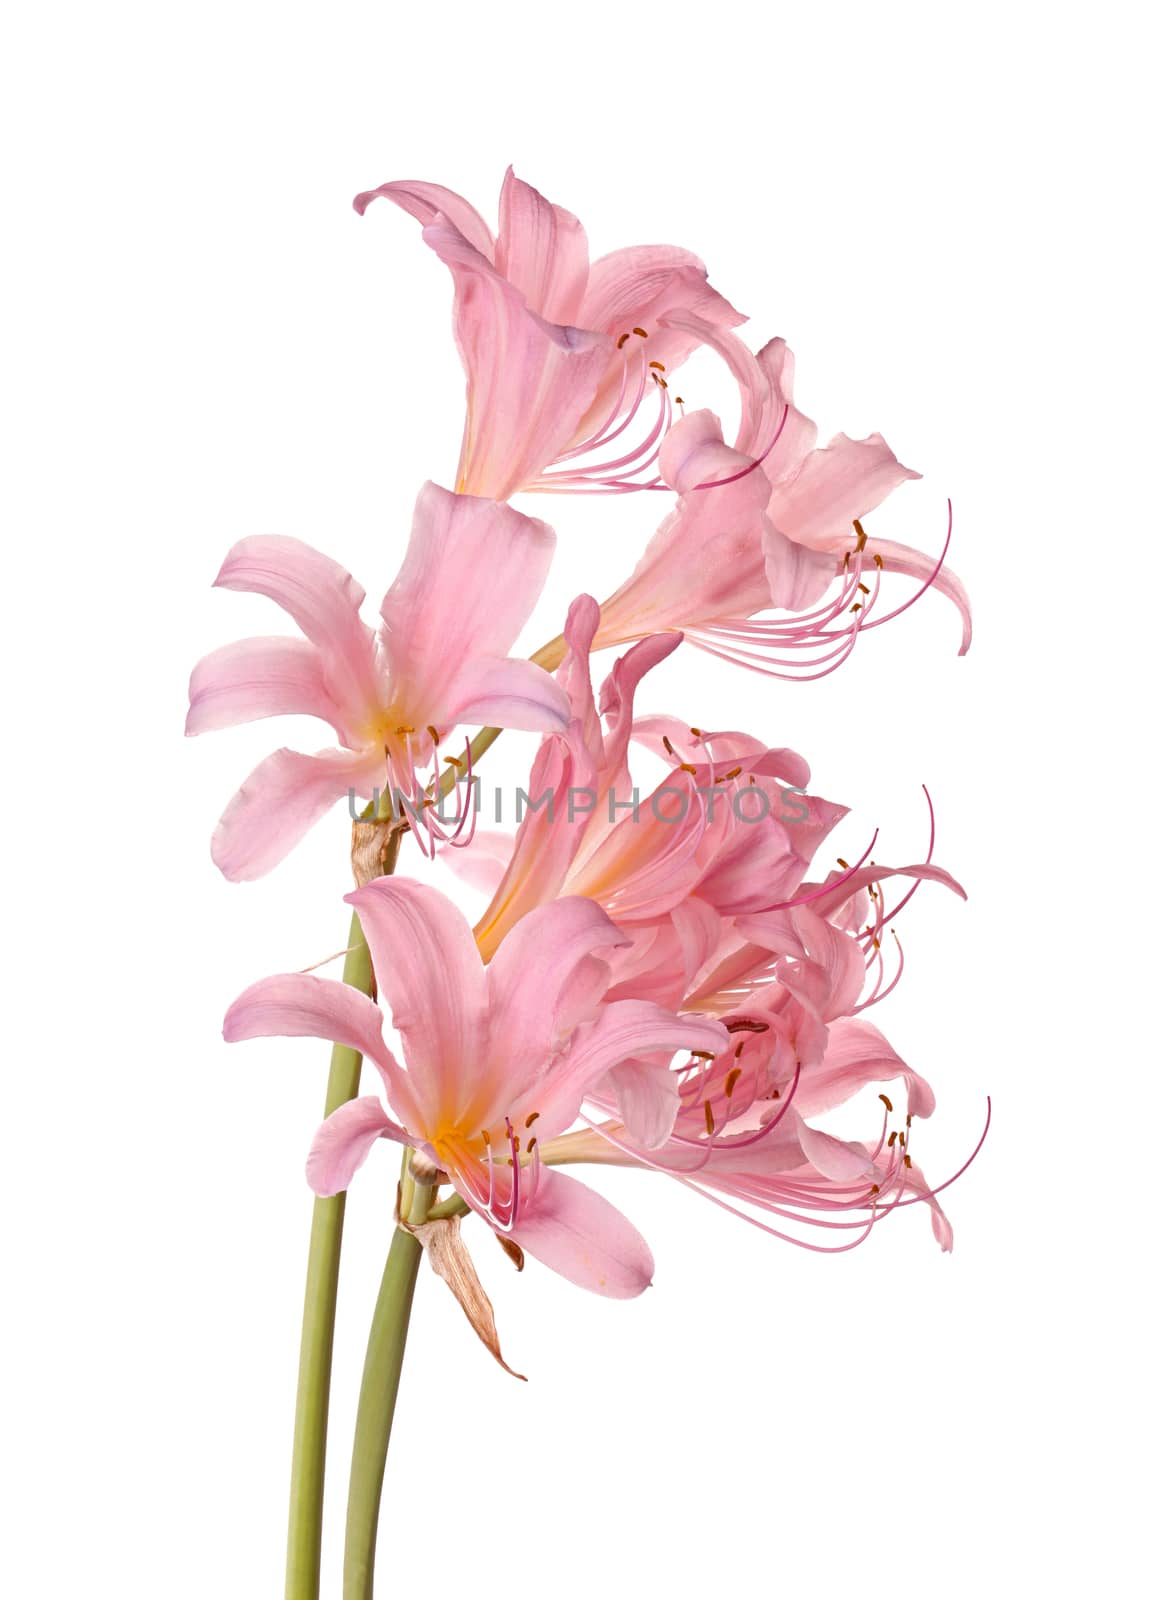 Two stems of pink-flowered Lycoris squamigera, also called resurrection flower, surprise lily or magic lily, isolated against a white background